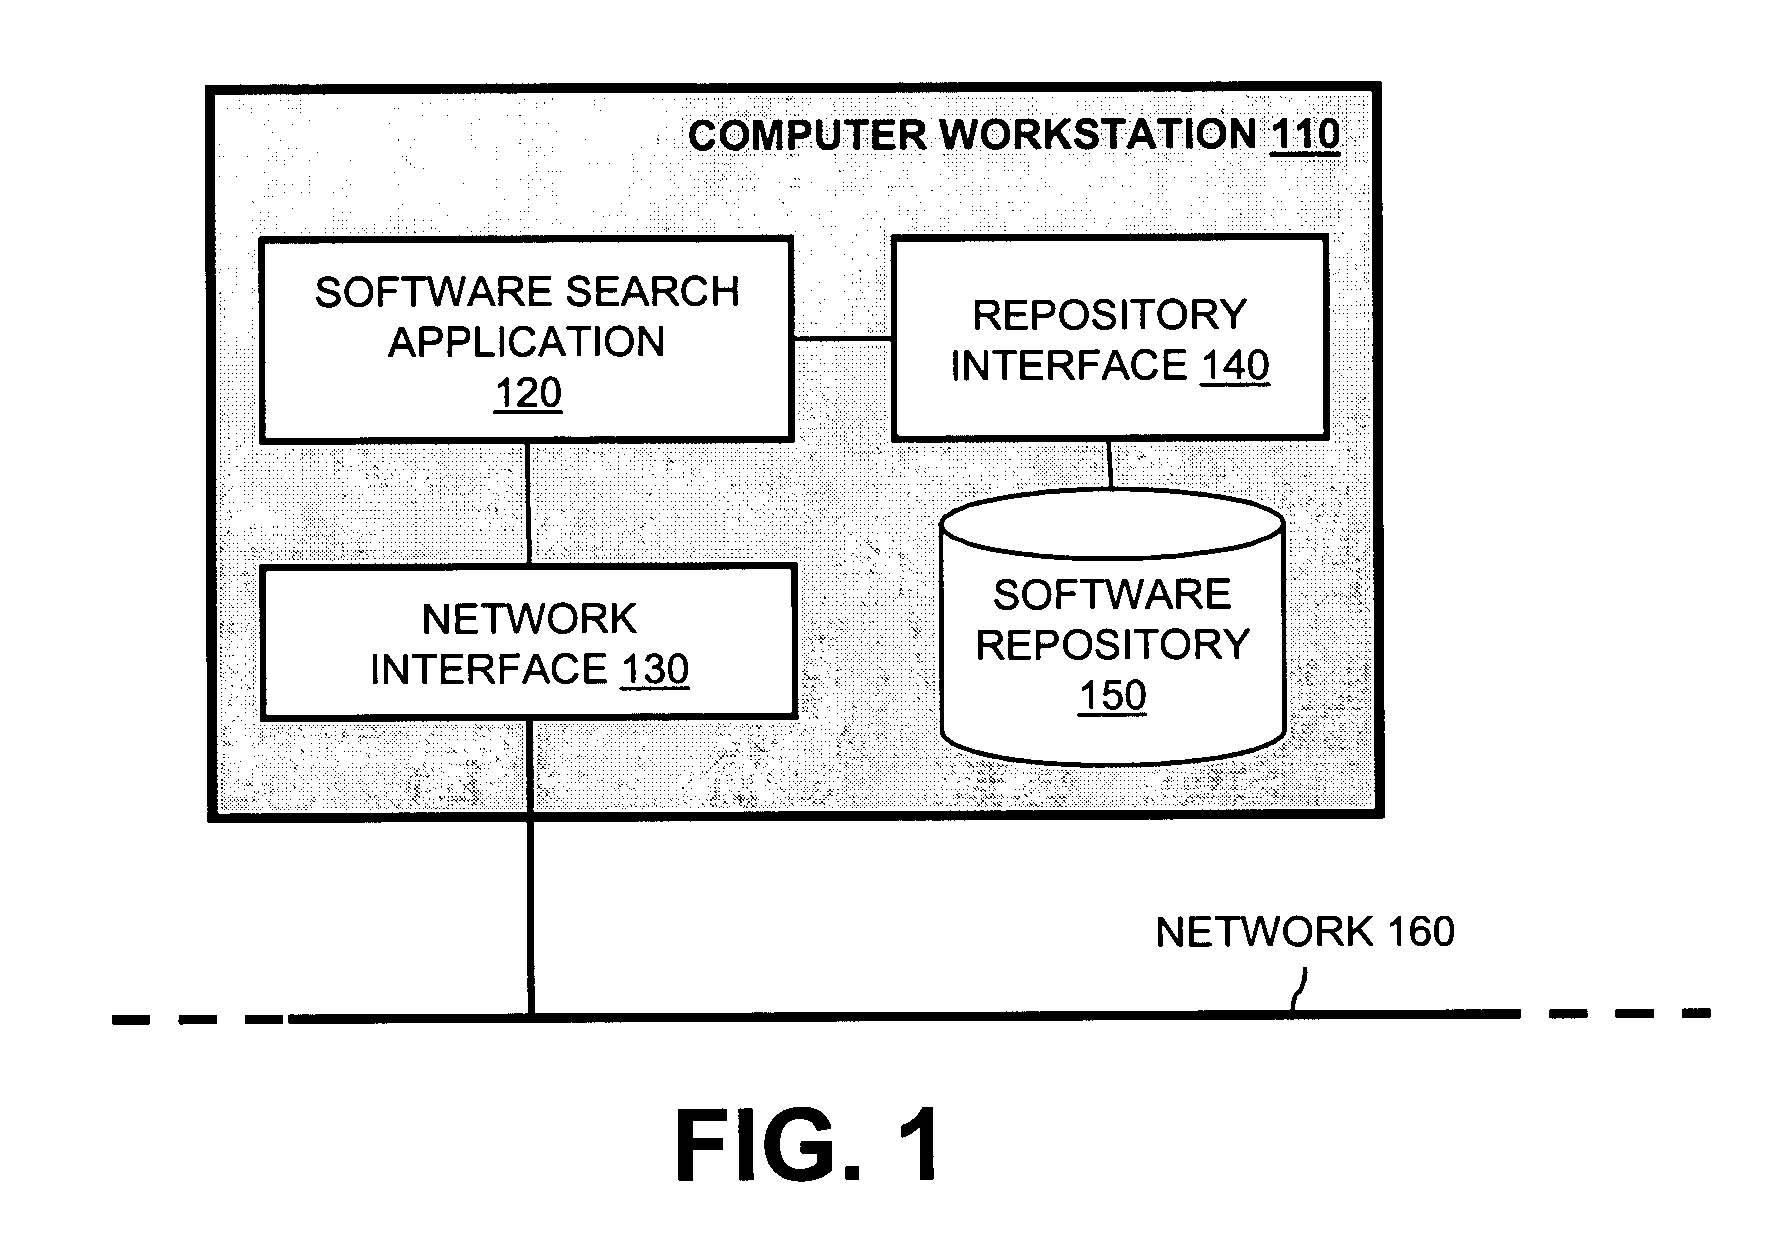 System and method for searching software repositories